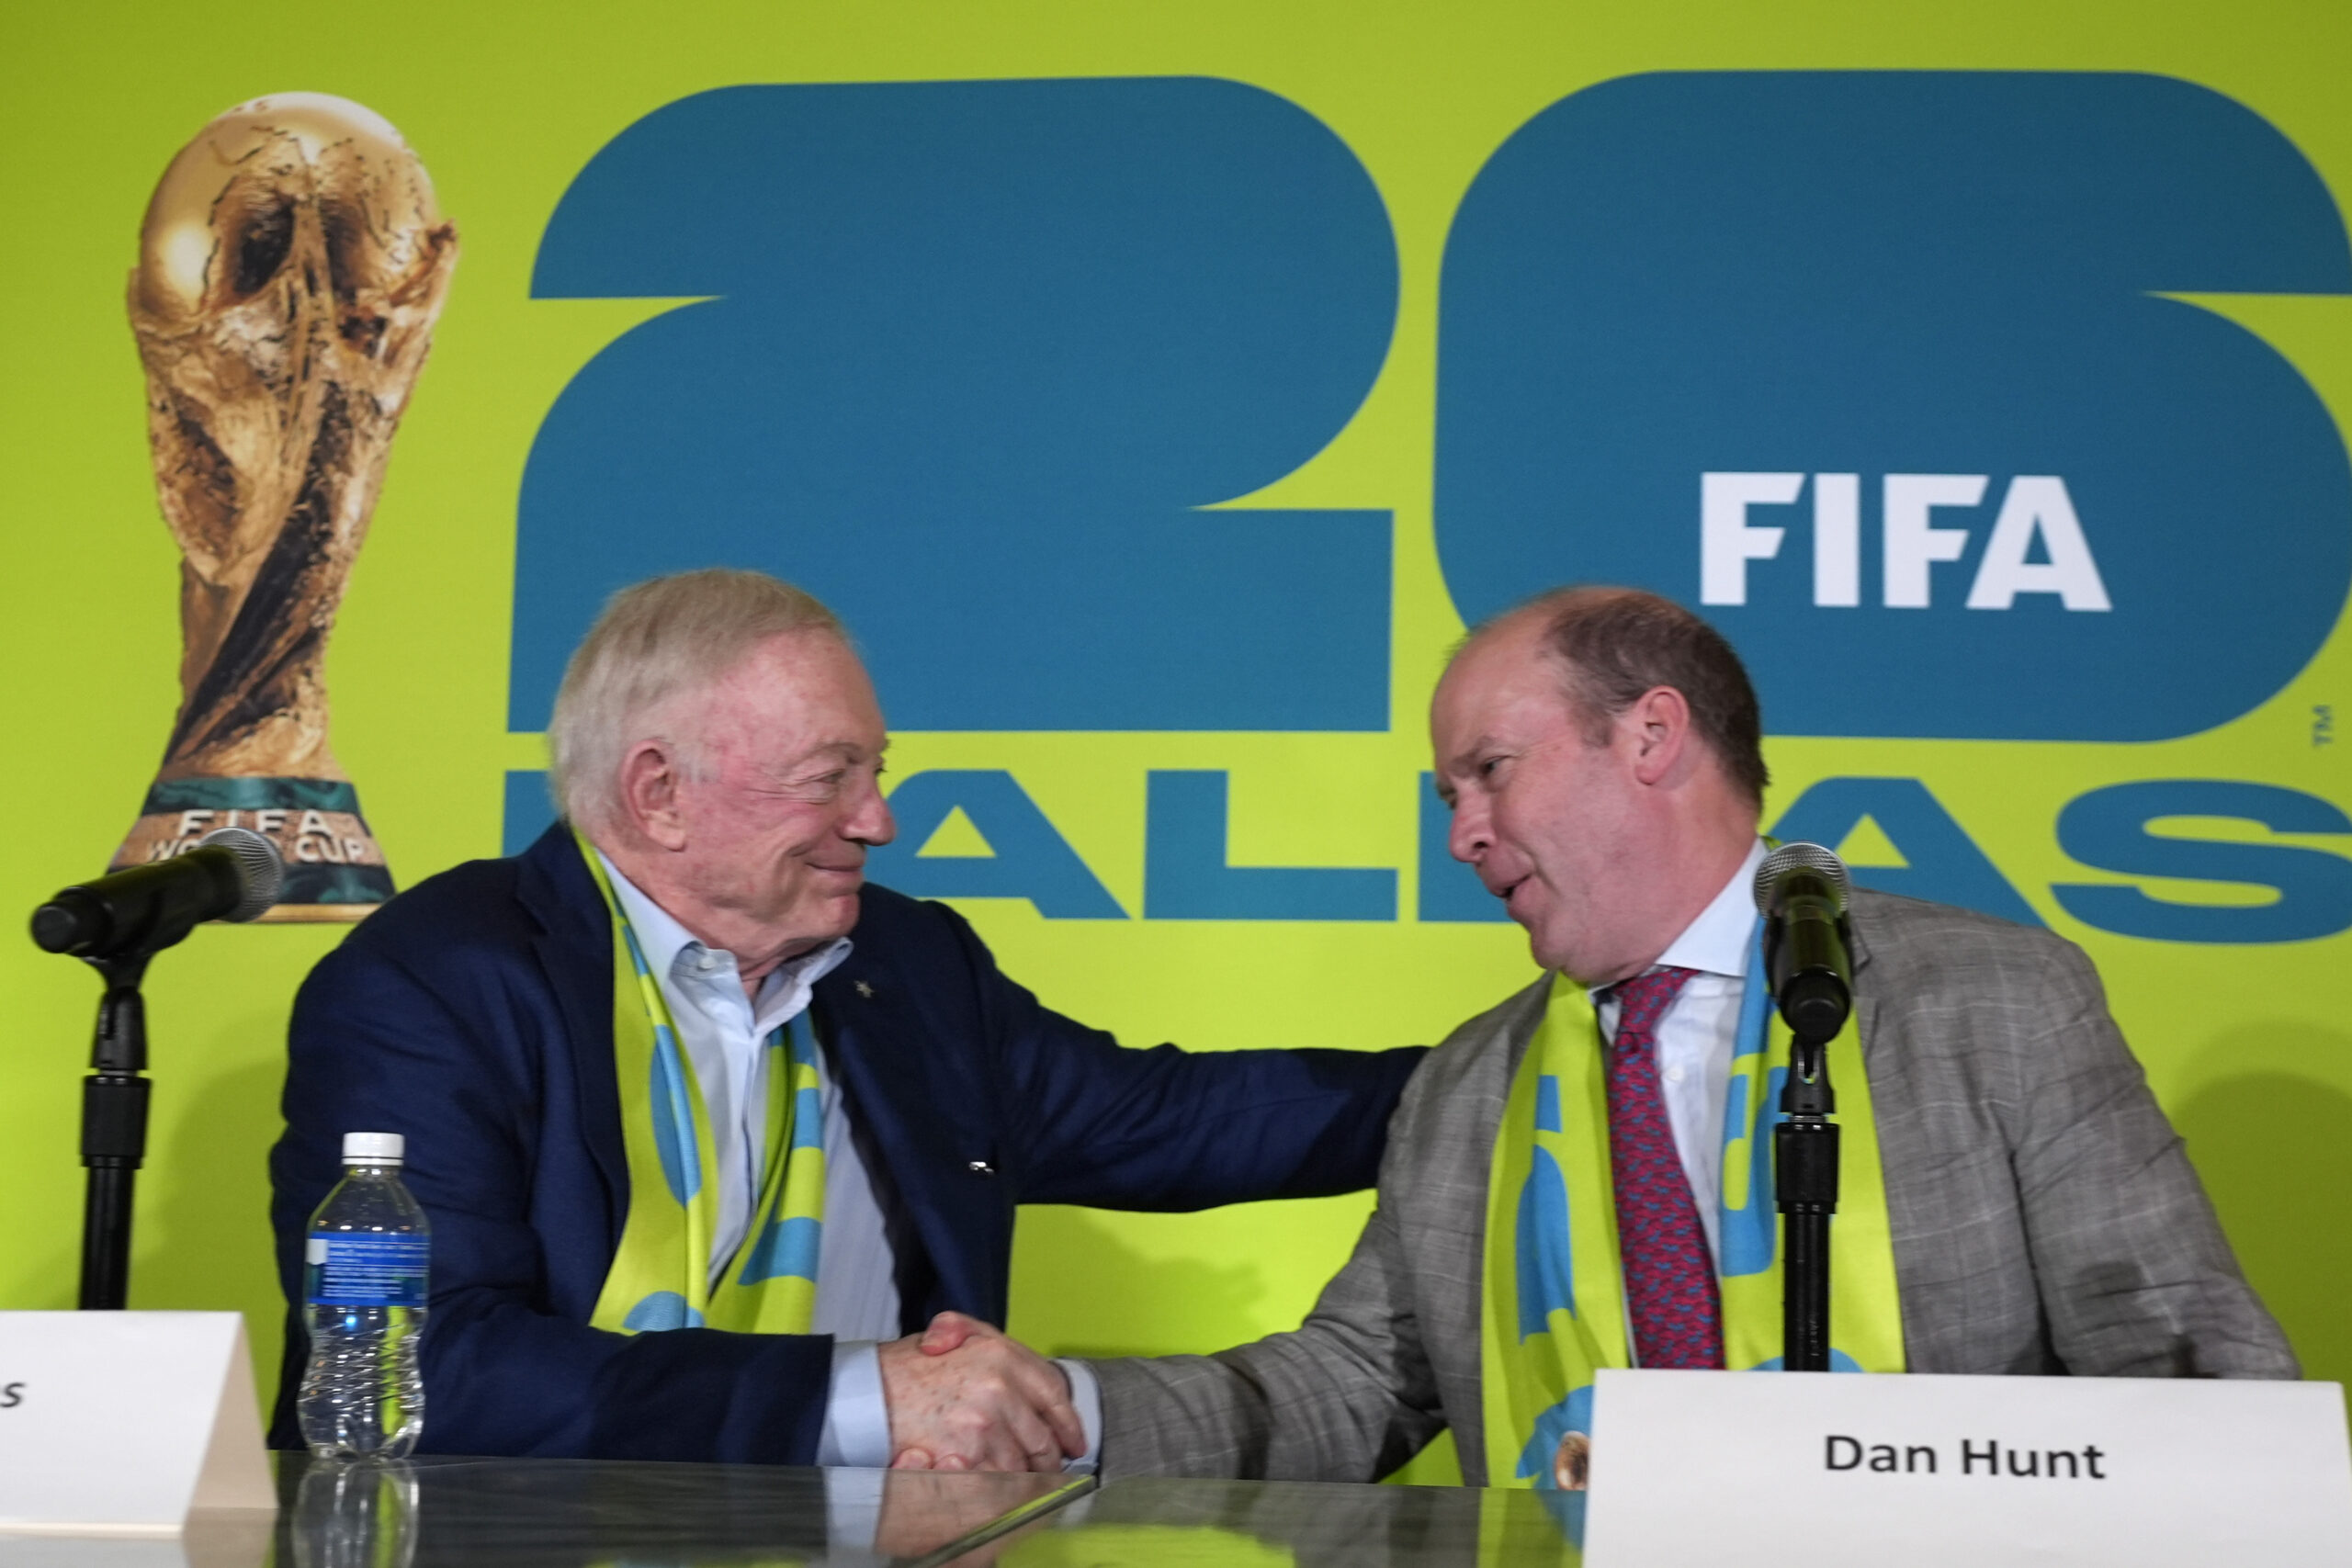 Dallas Cowboys owner Jerry Jones, left, and FC Dallas president Dan Hunt, right, shake hands after the match schedule was revealed for soccer's FIFA World Cup 2026 during an even at AT&T Stadium in Arlington, Texas, Sunday, Feb. 4, 2024. (AP Photo/LM Otero)